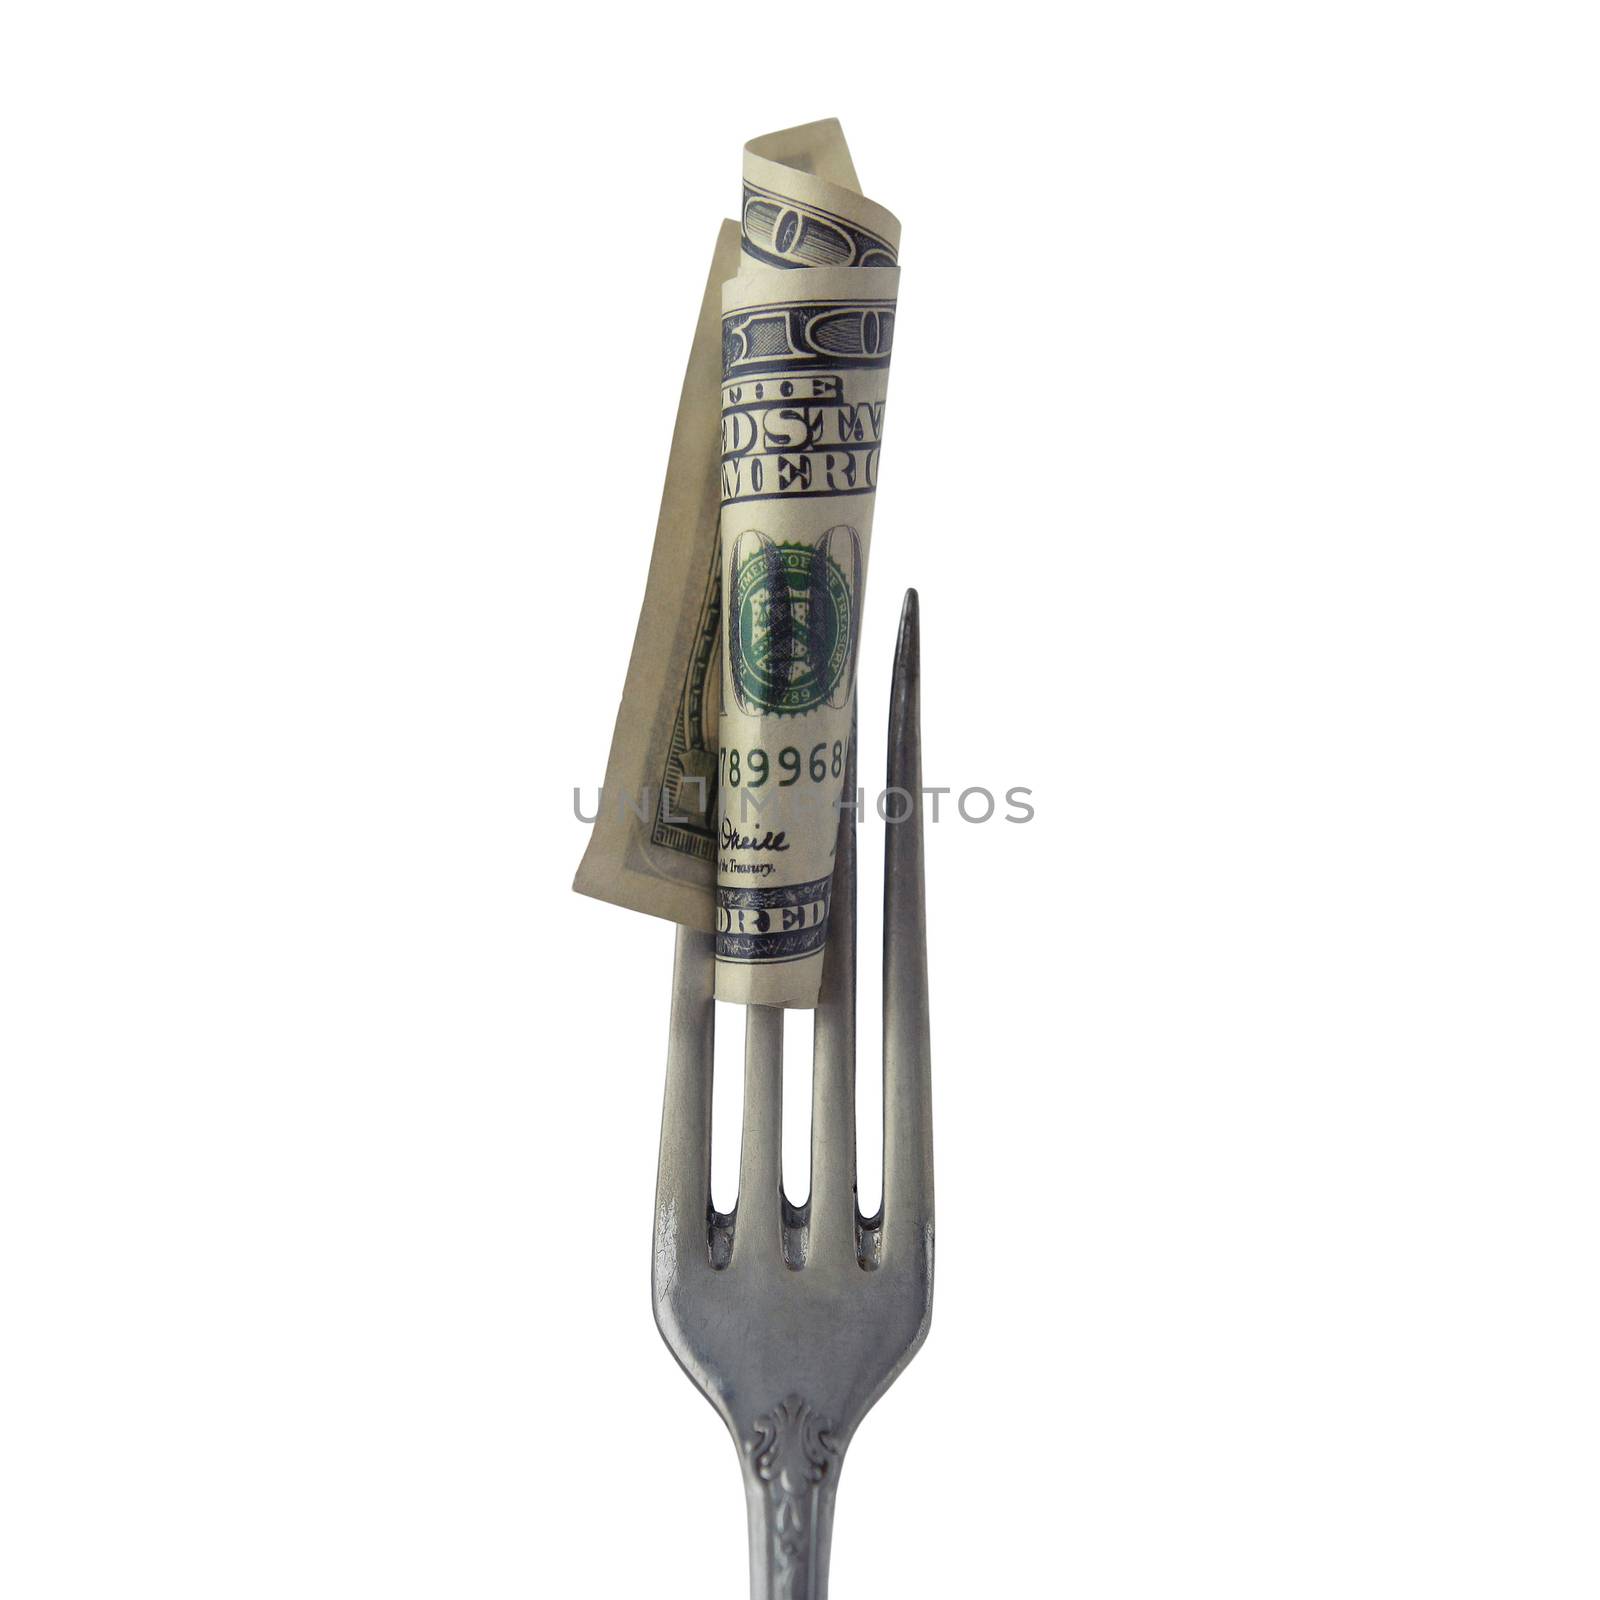 Dollar twisted taken on a fork food - Isolated object on a white backgroundDollar twisted taken on a fork food - Isolated object on a white background by cococinema